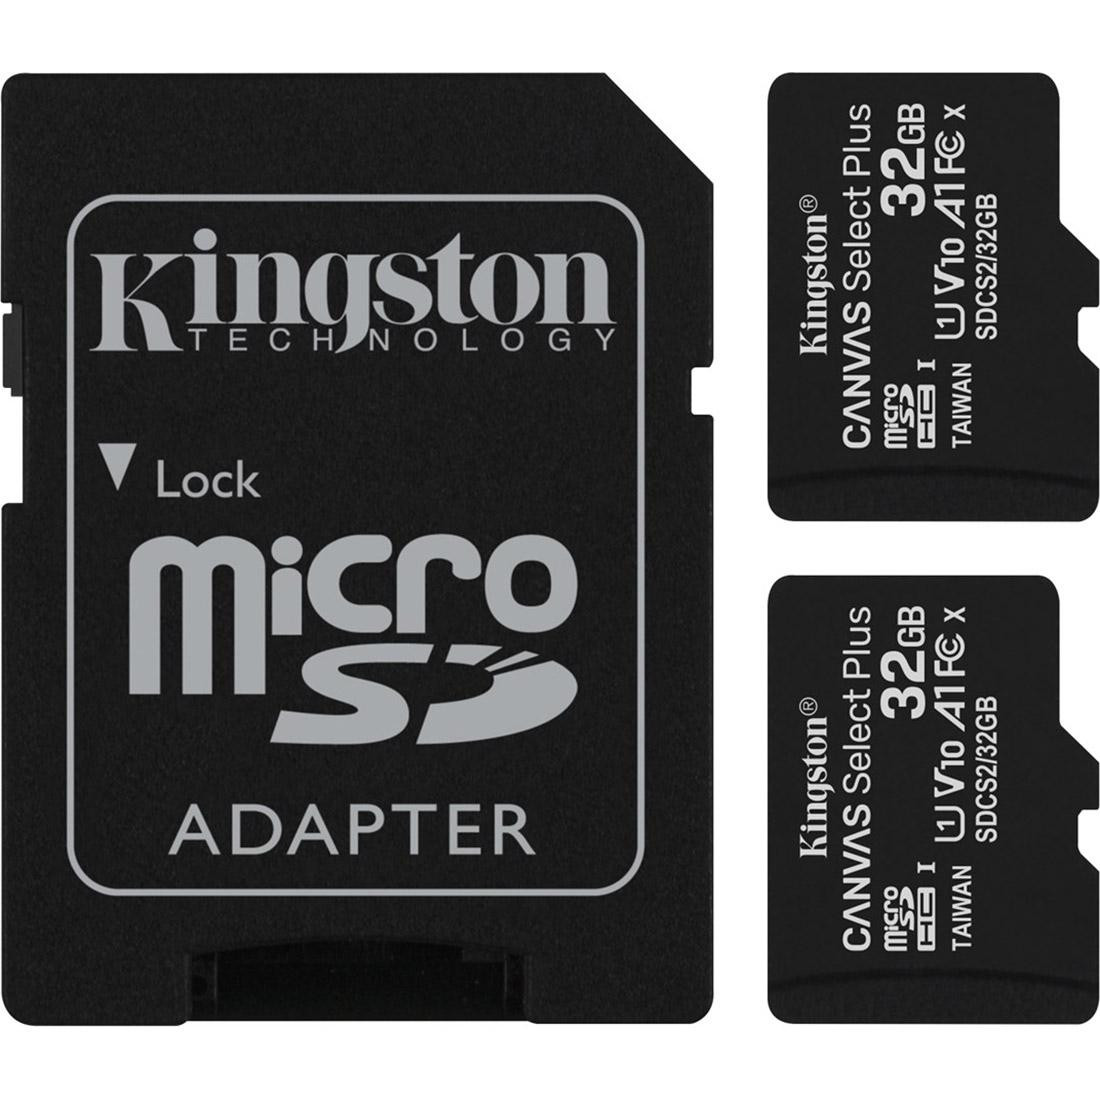 Kingston 32 GB microSDHC Canvas Select Plus UHS-I V10 A1 Class 10 2-pack + SD-adapter (SDCS2/32GB-2P1A) - зображення 1